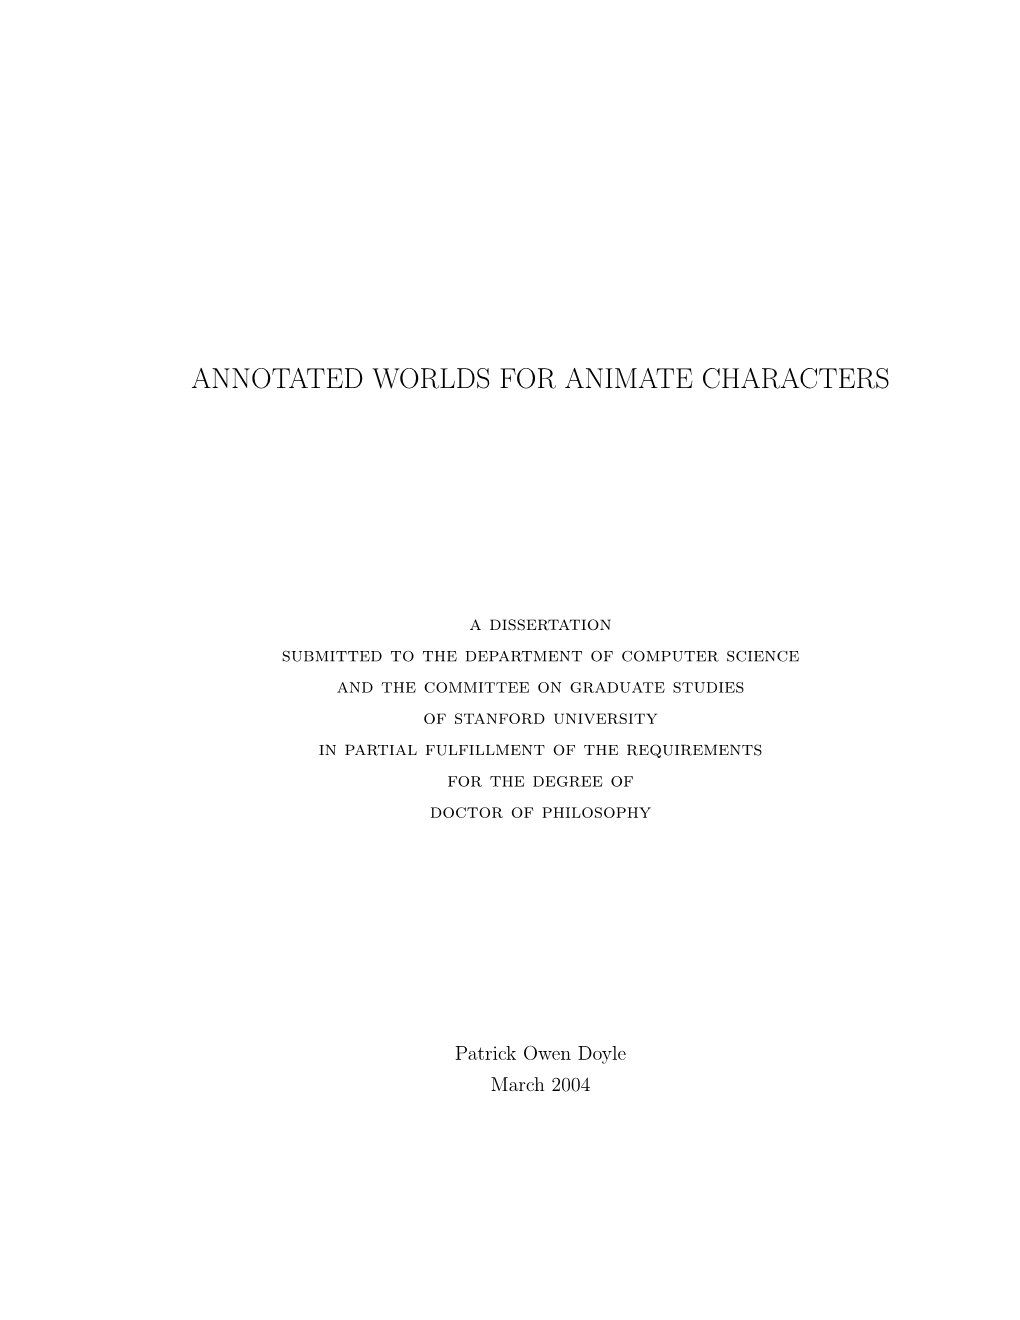 Annotated Worlds for Animate Characters